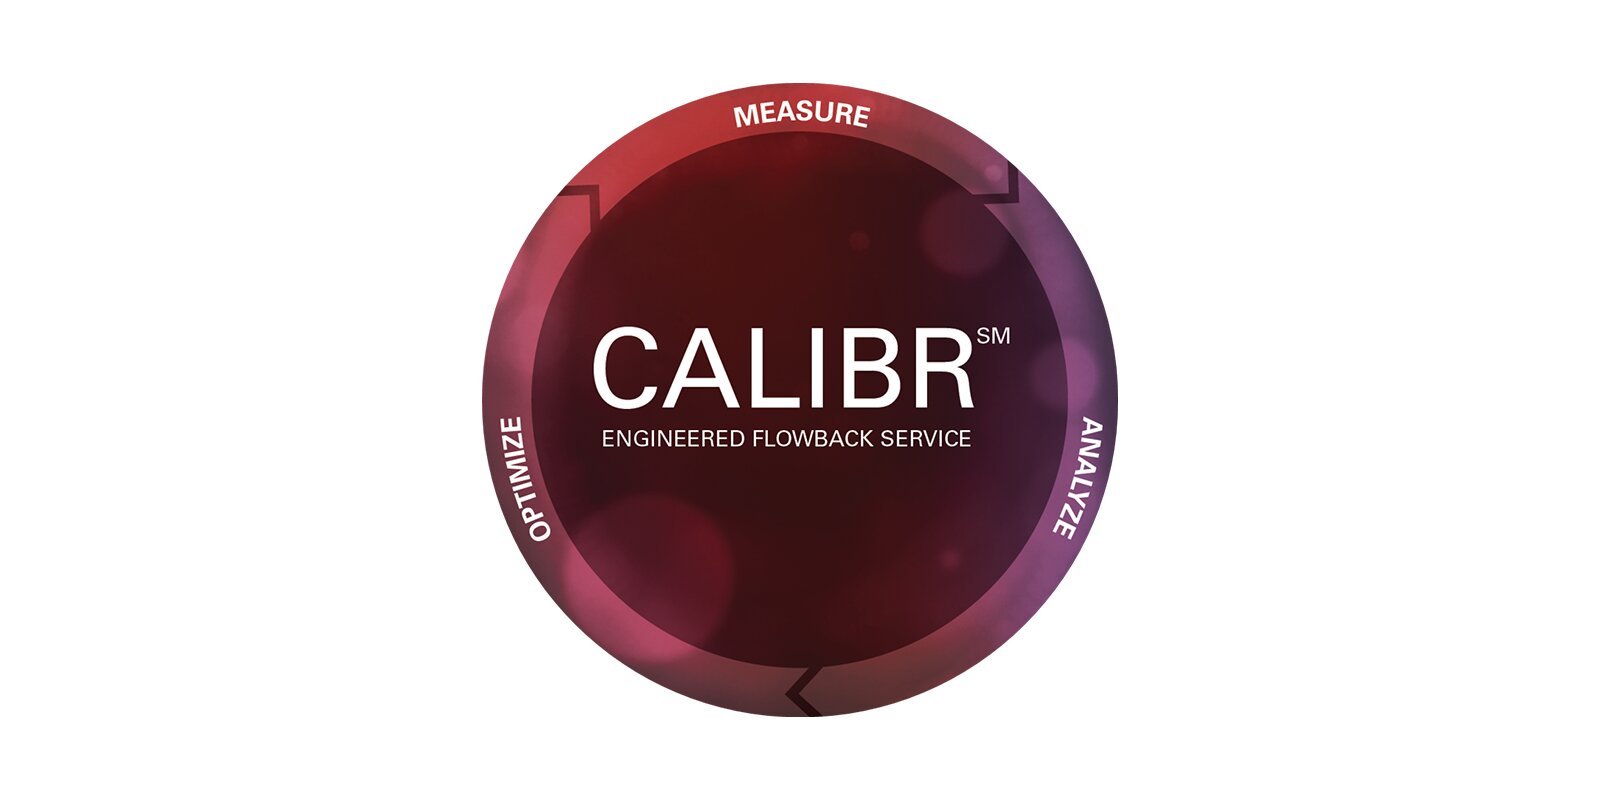 Maximum recovery with CALIBR flowback service